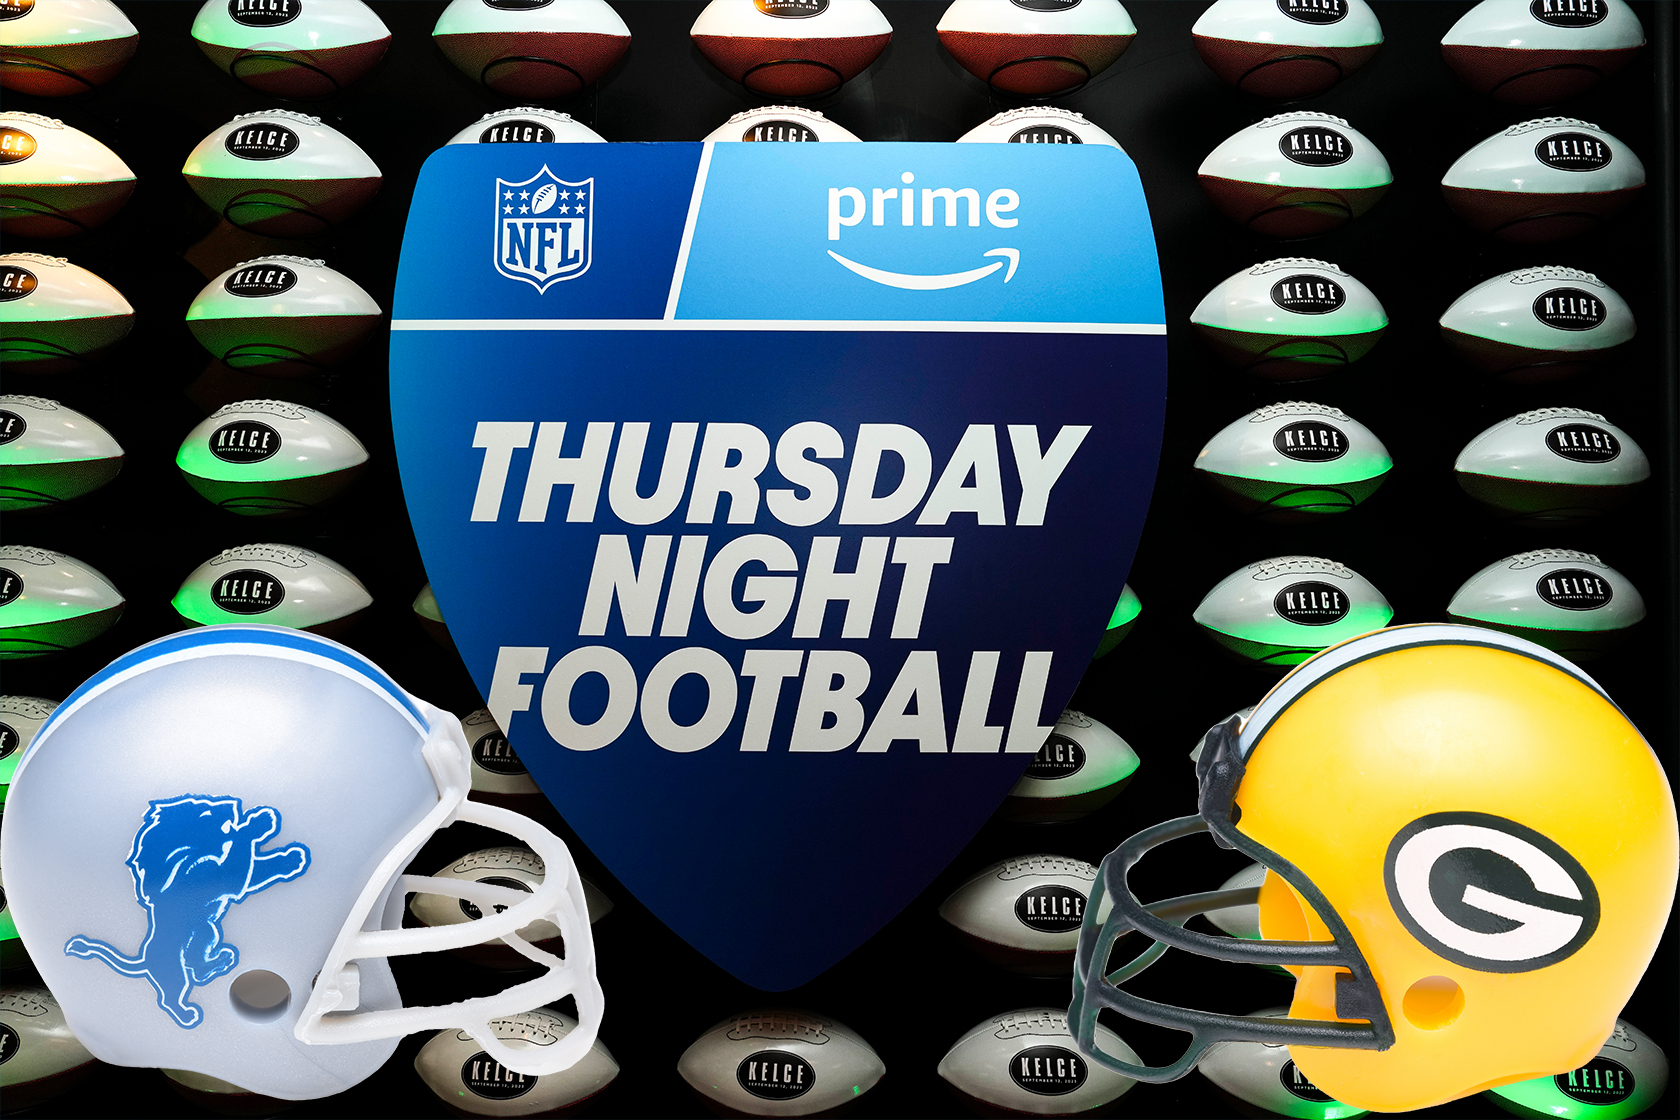 who is favored to win thursday night football tonight